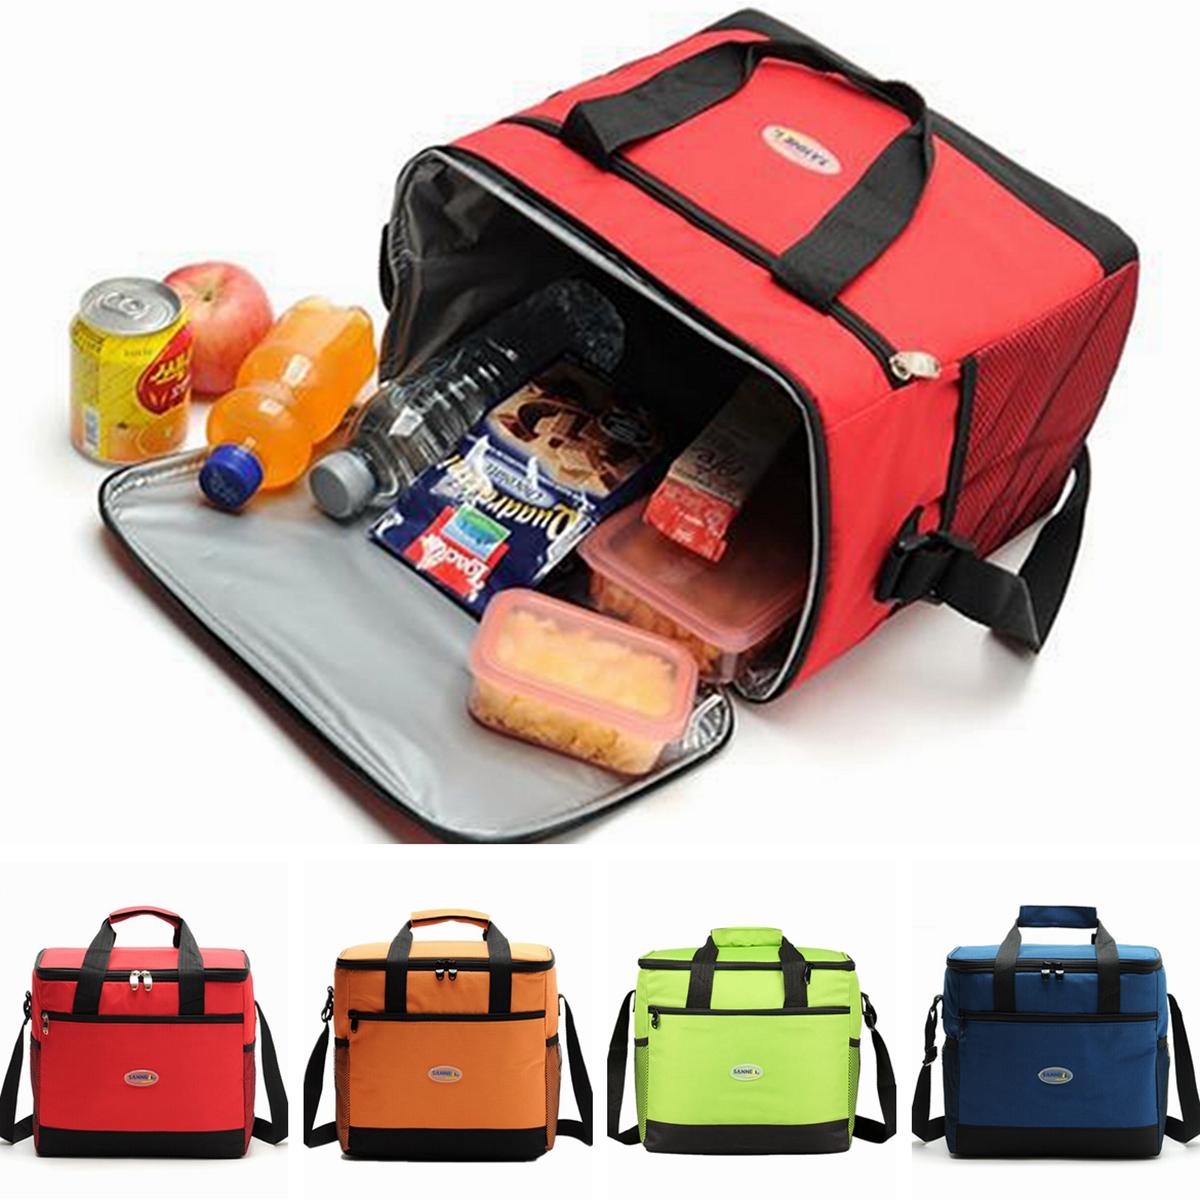 Grote Isolated Cooler Cool Bag Outdoor Camping Picnic Lunch Shoulder Handbag